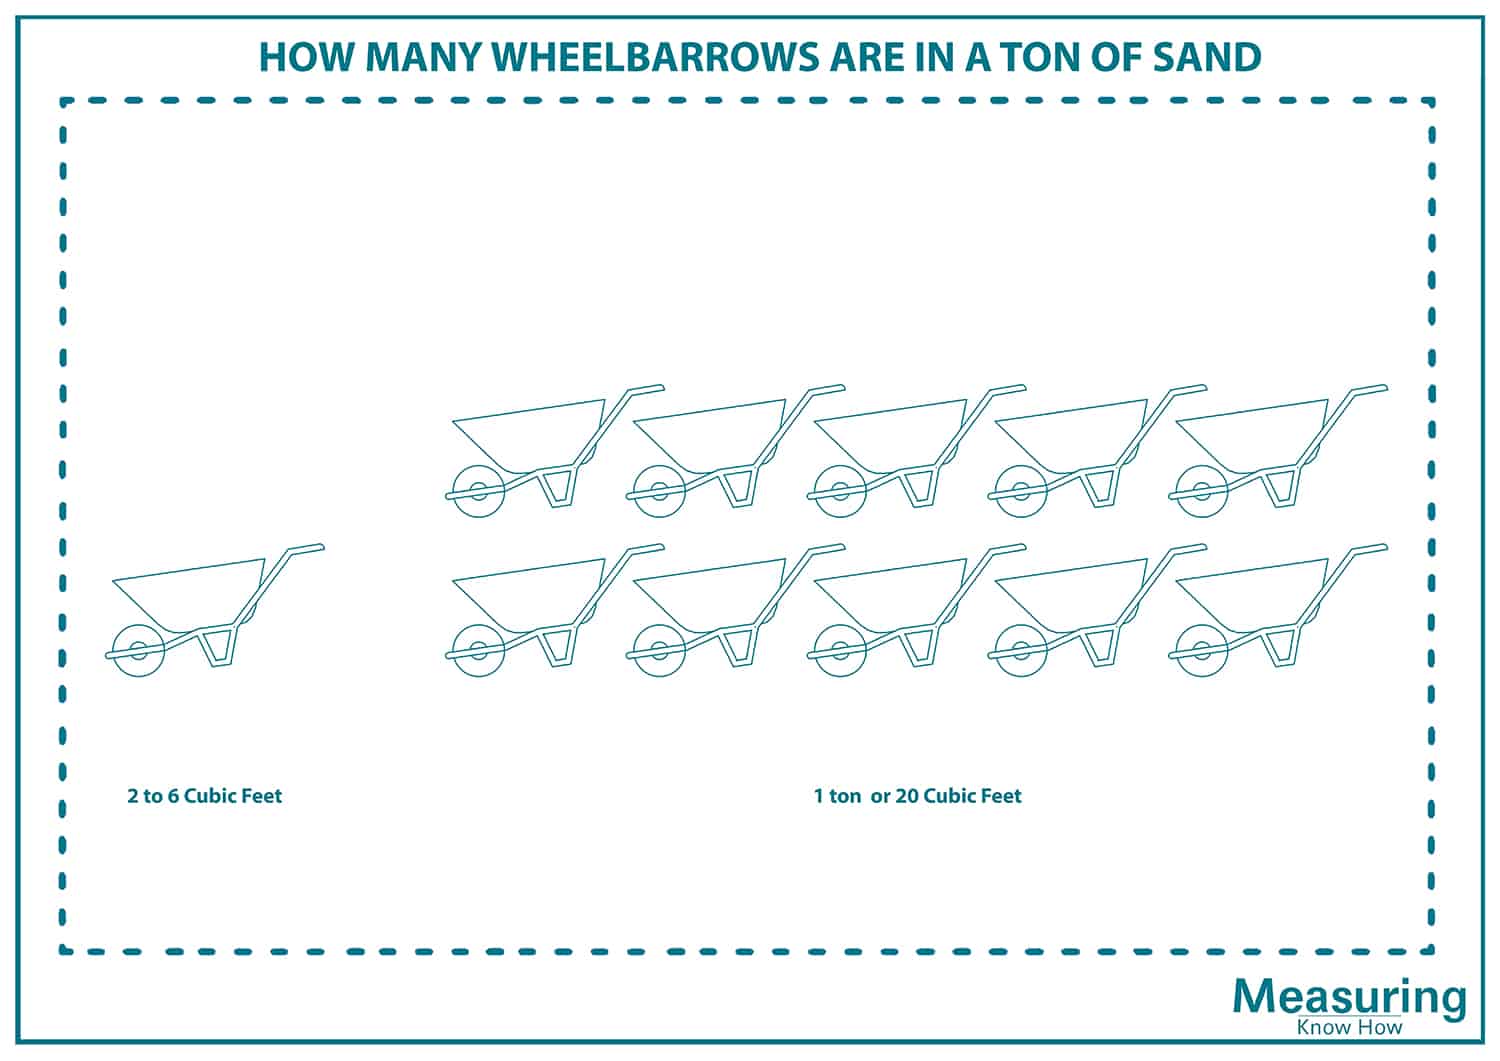 How many wheelbarrows are in a ton of sand